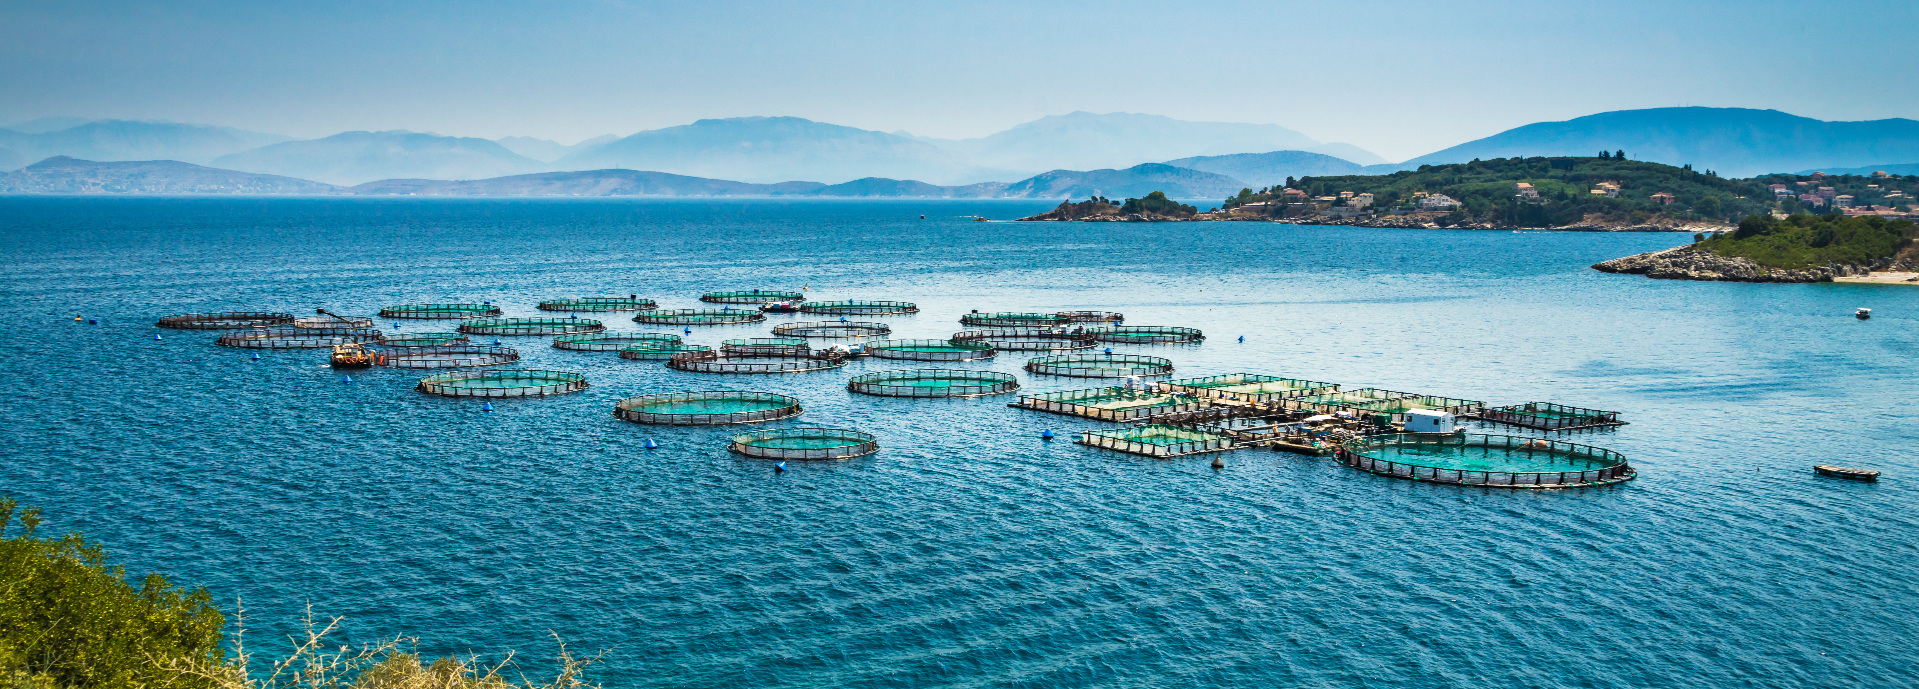 Aerial image of a fish farm in a large area of water